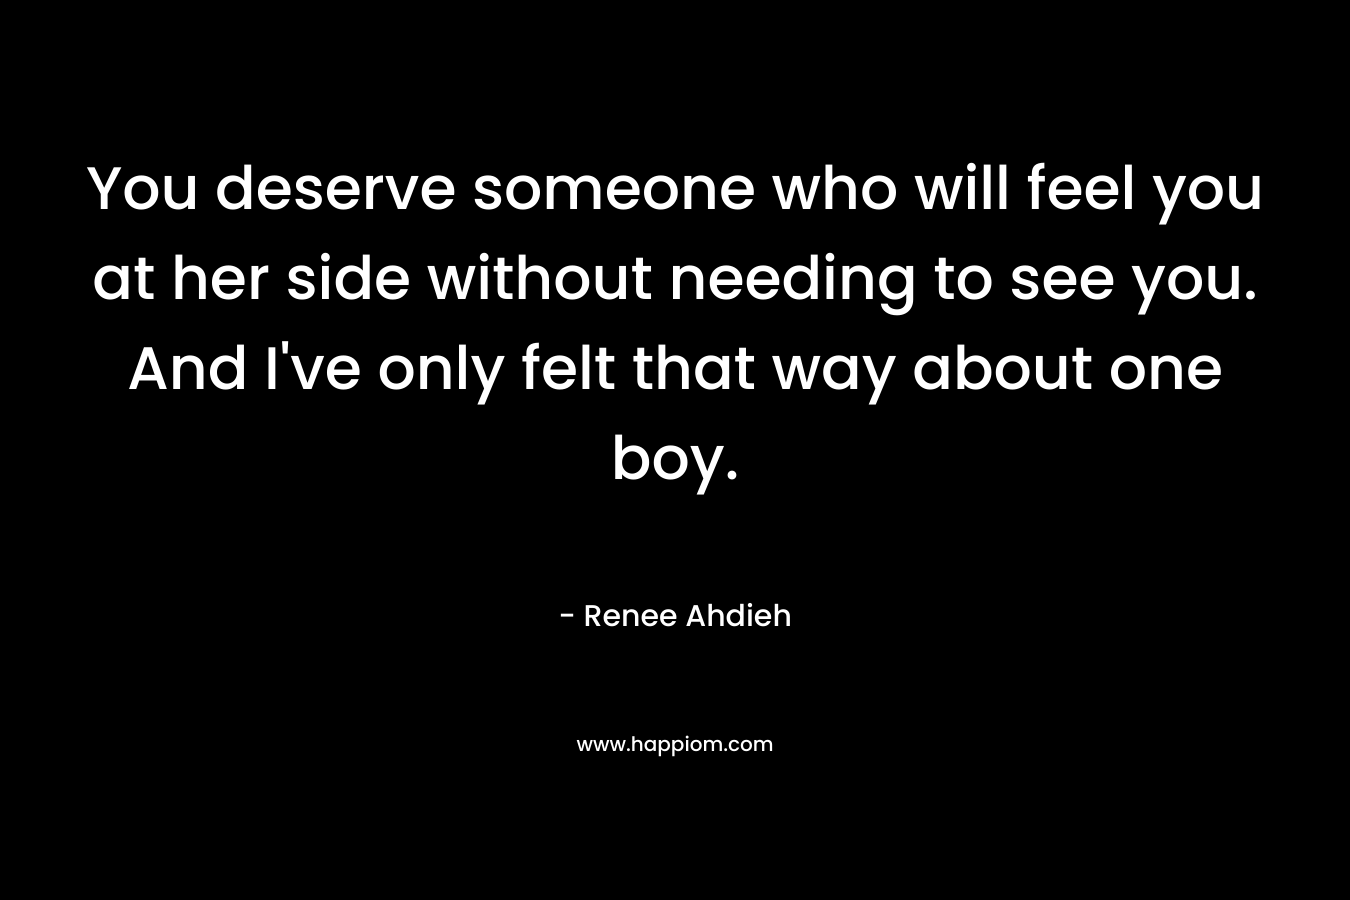 You deserve someone who will feel you at her side without needing to see you. And I've only felt that way about one boy.